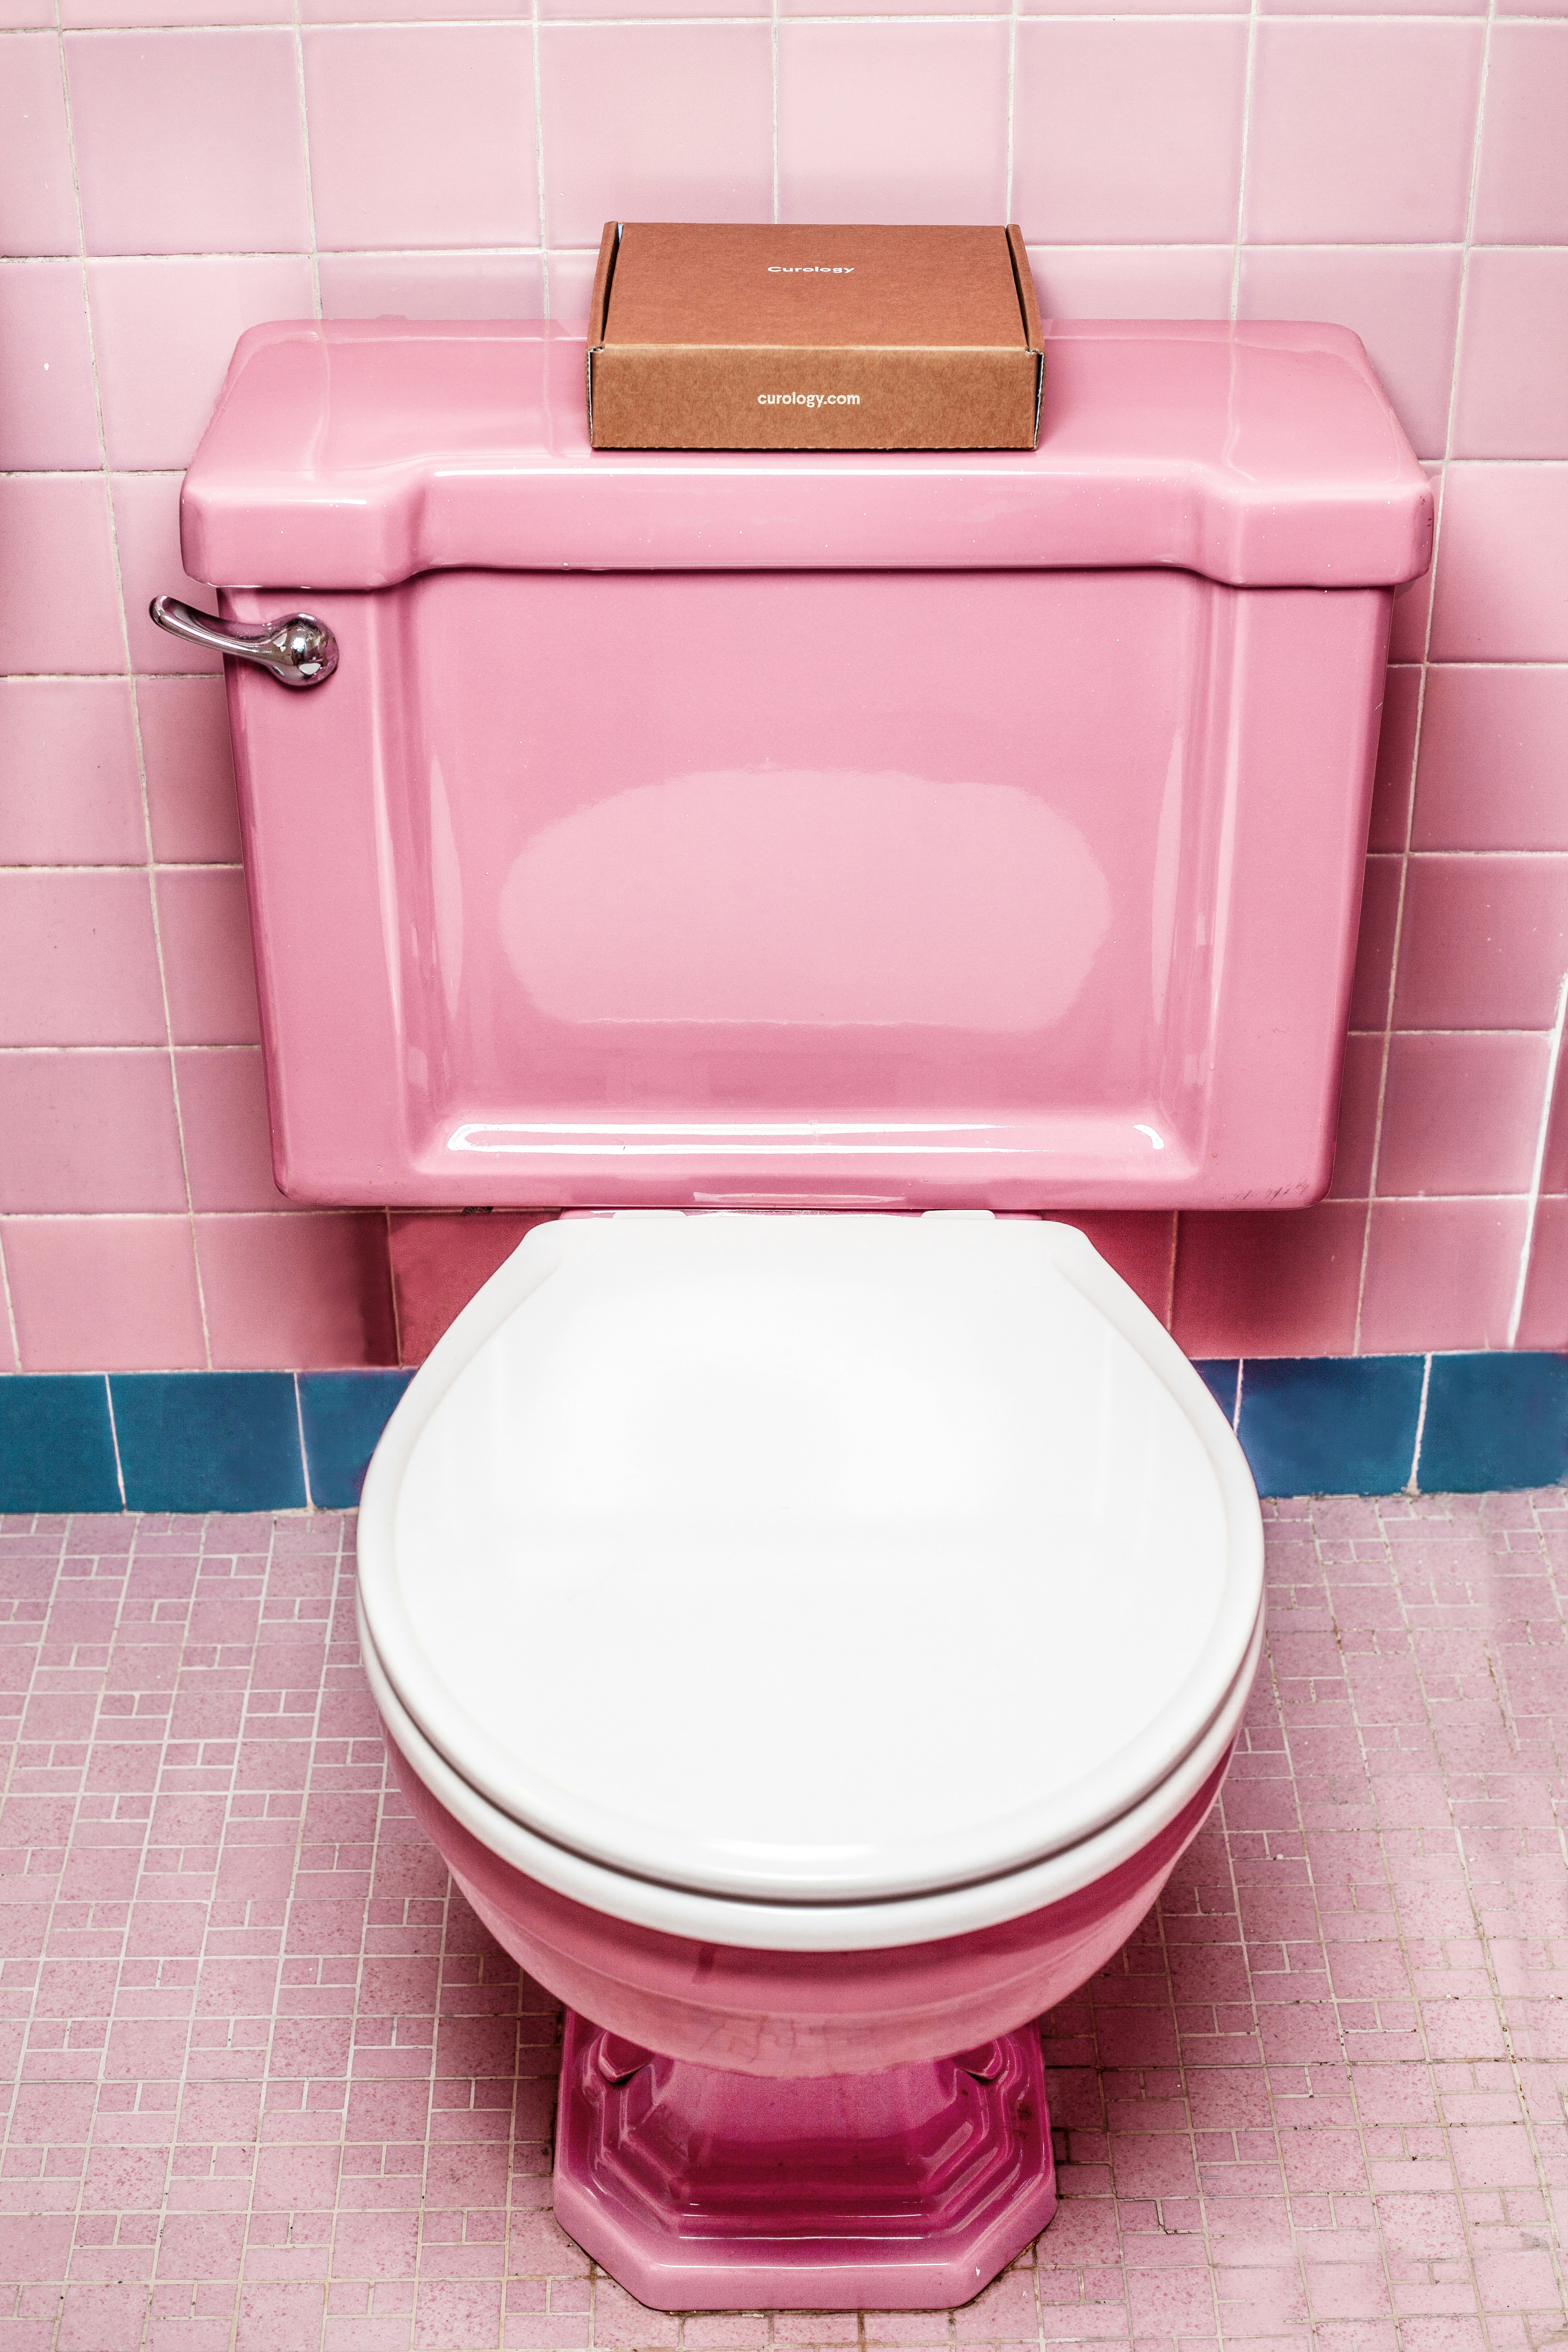 Kids And Toilets: How To Prevent Them From Happening